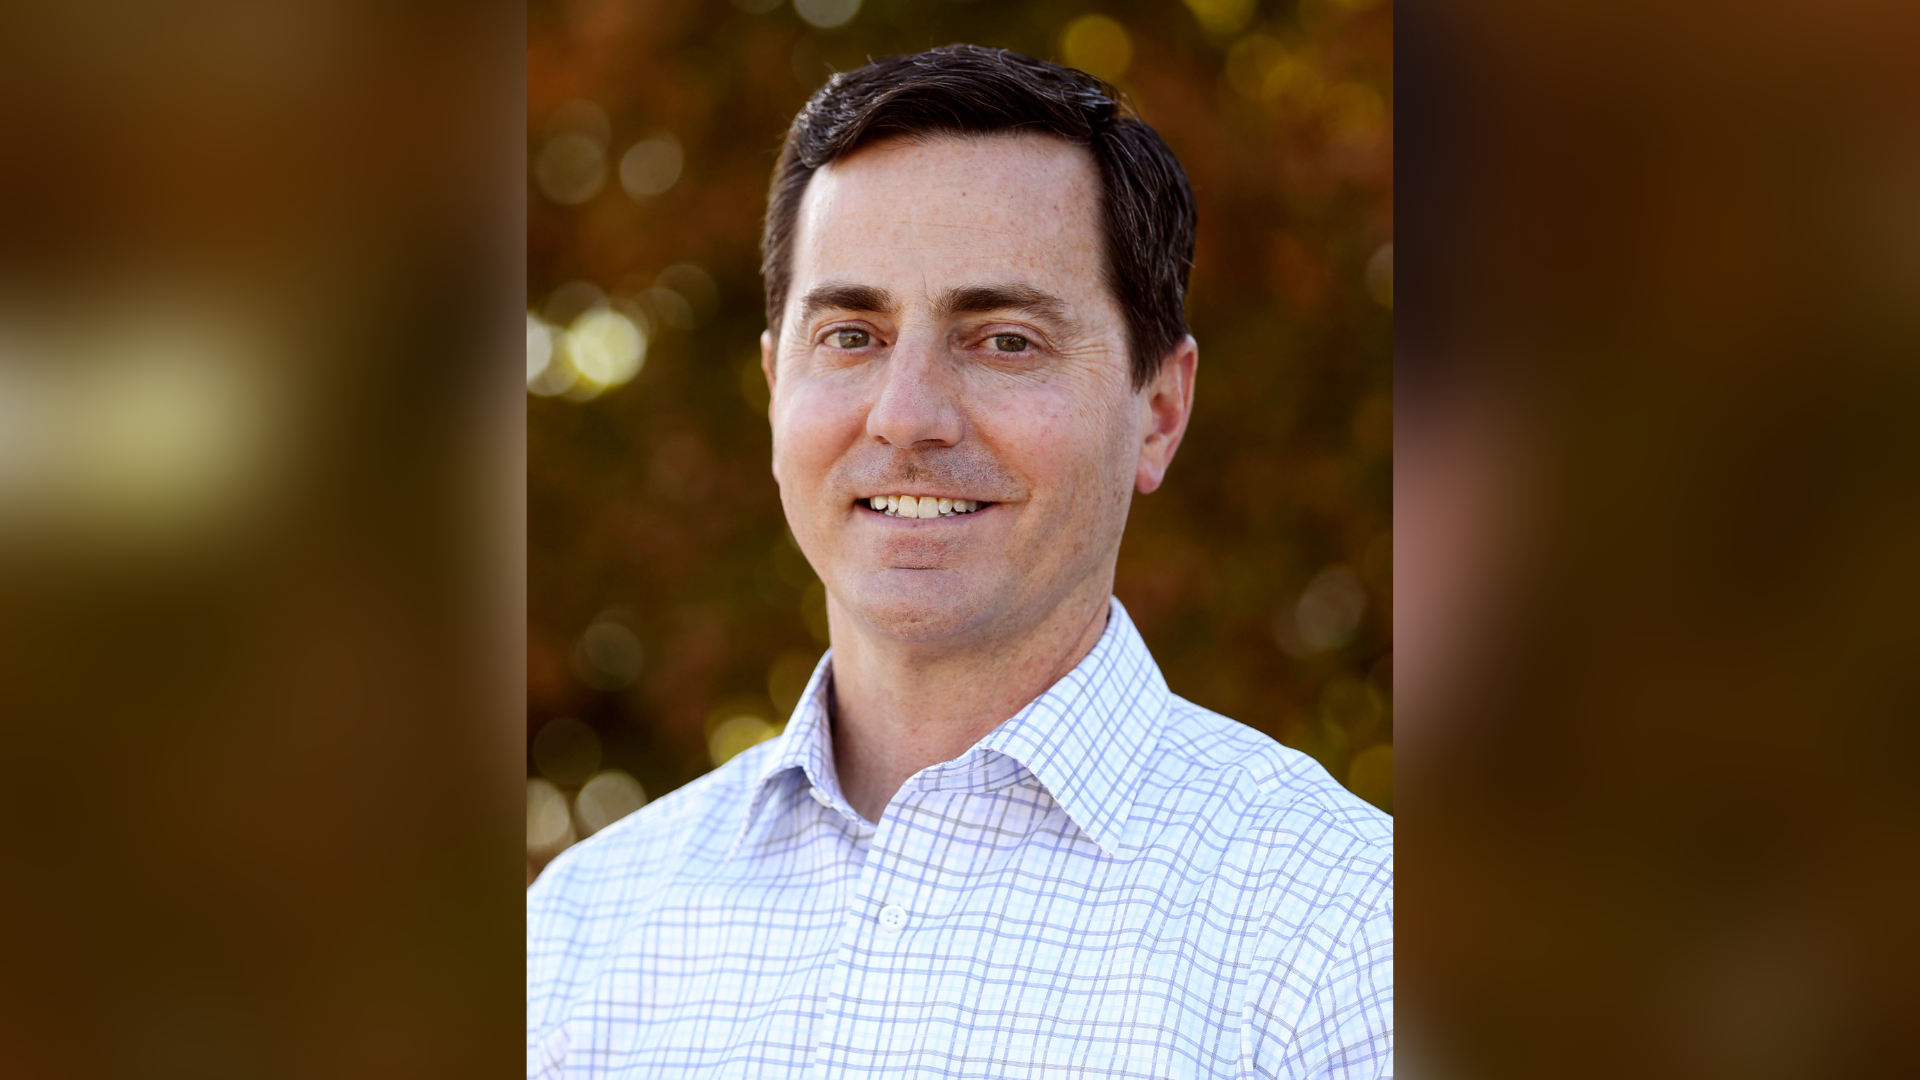 Riverton Mayor Trent Staggs says he will run for the U.S. Senate in 2024. "Right now, Washington is...